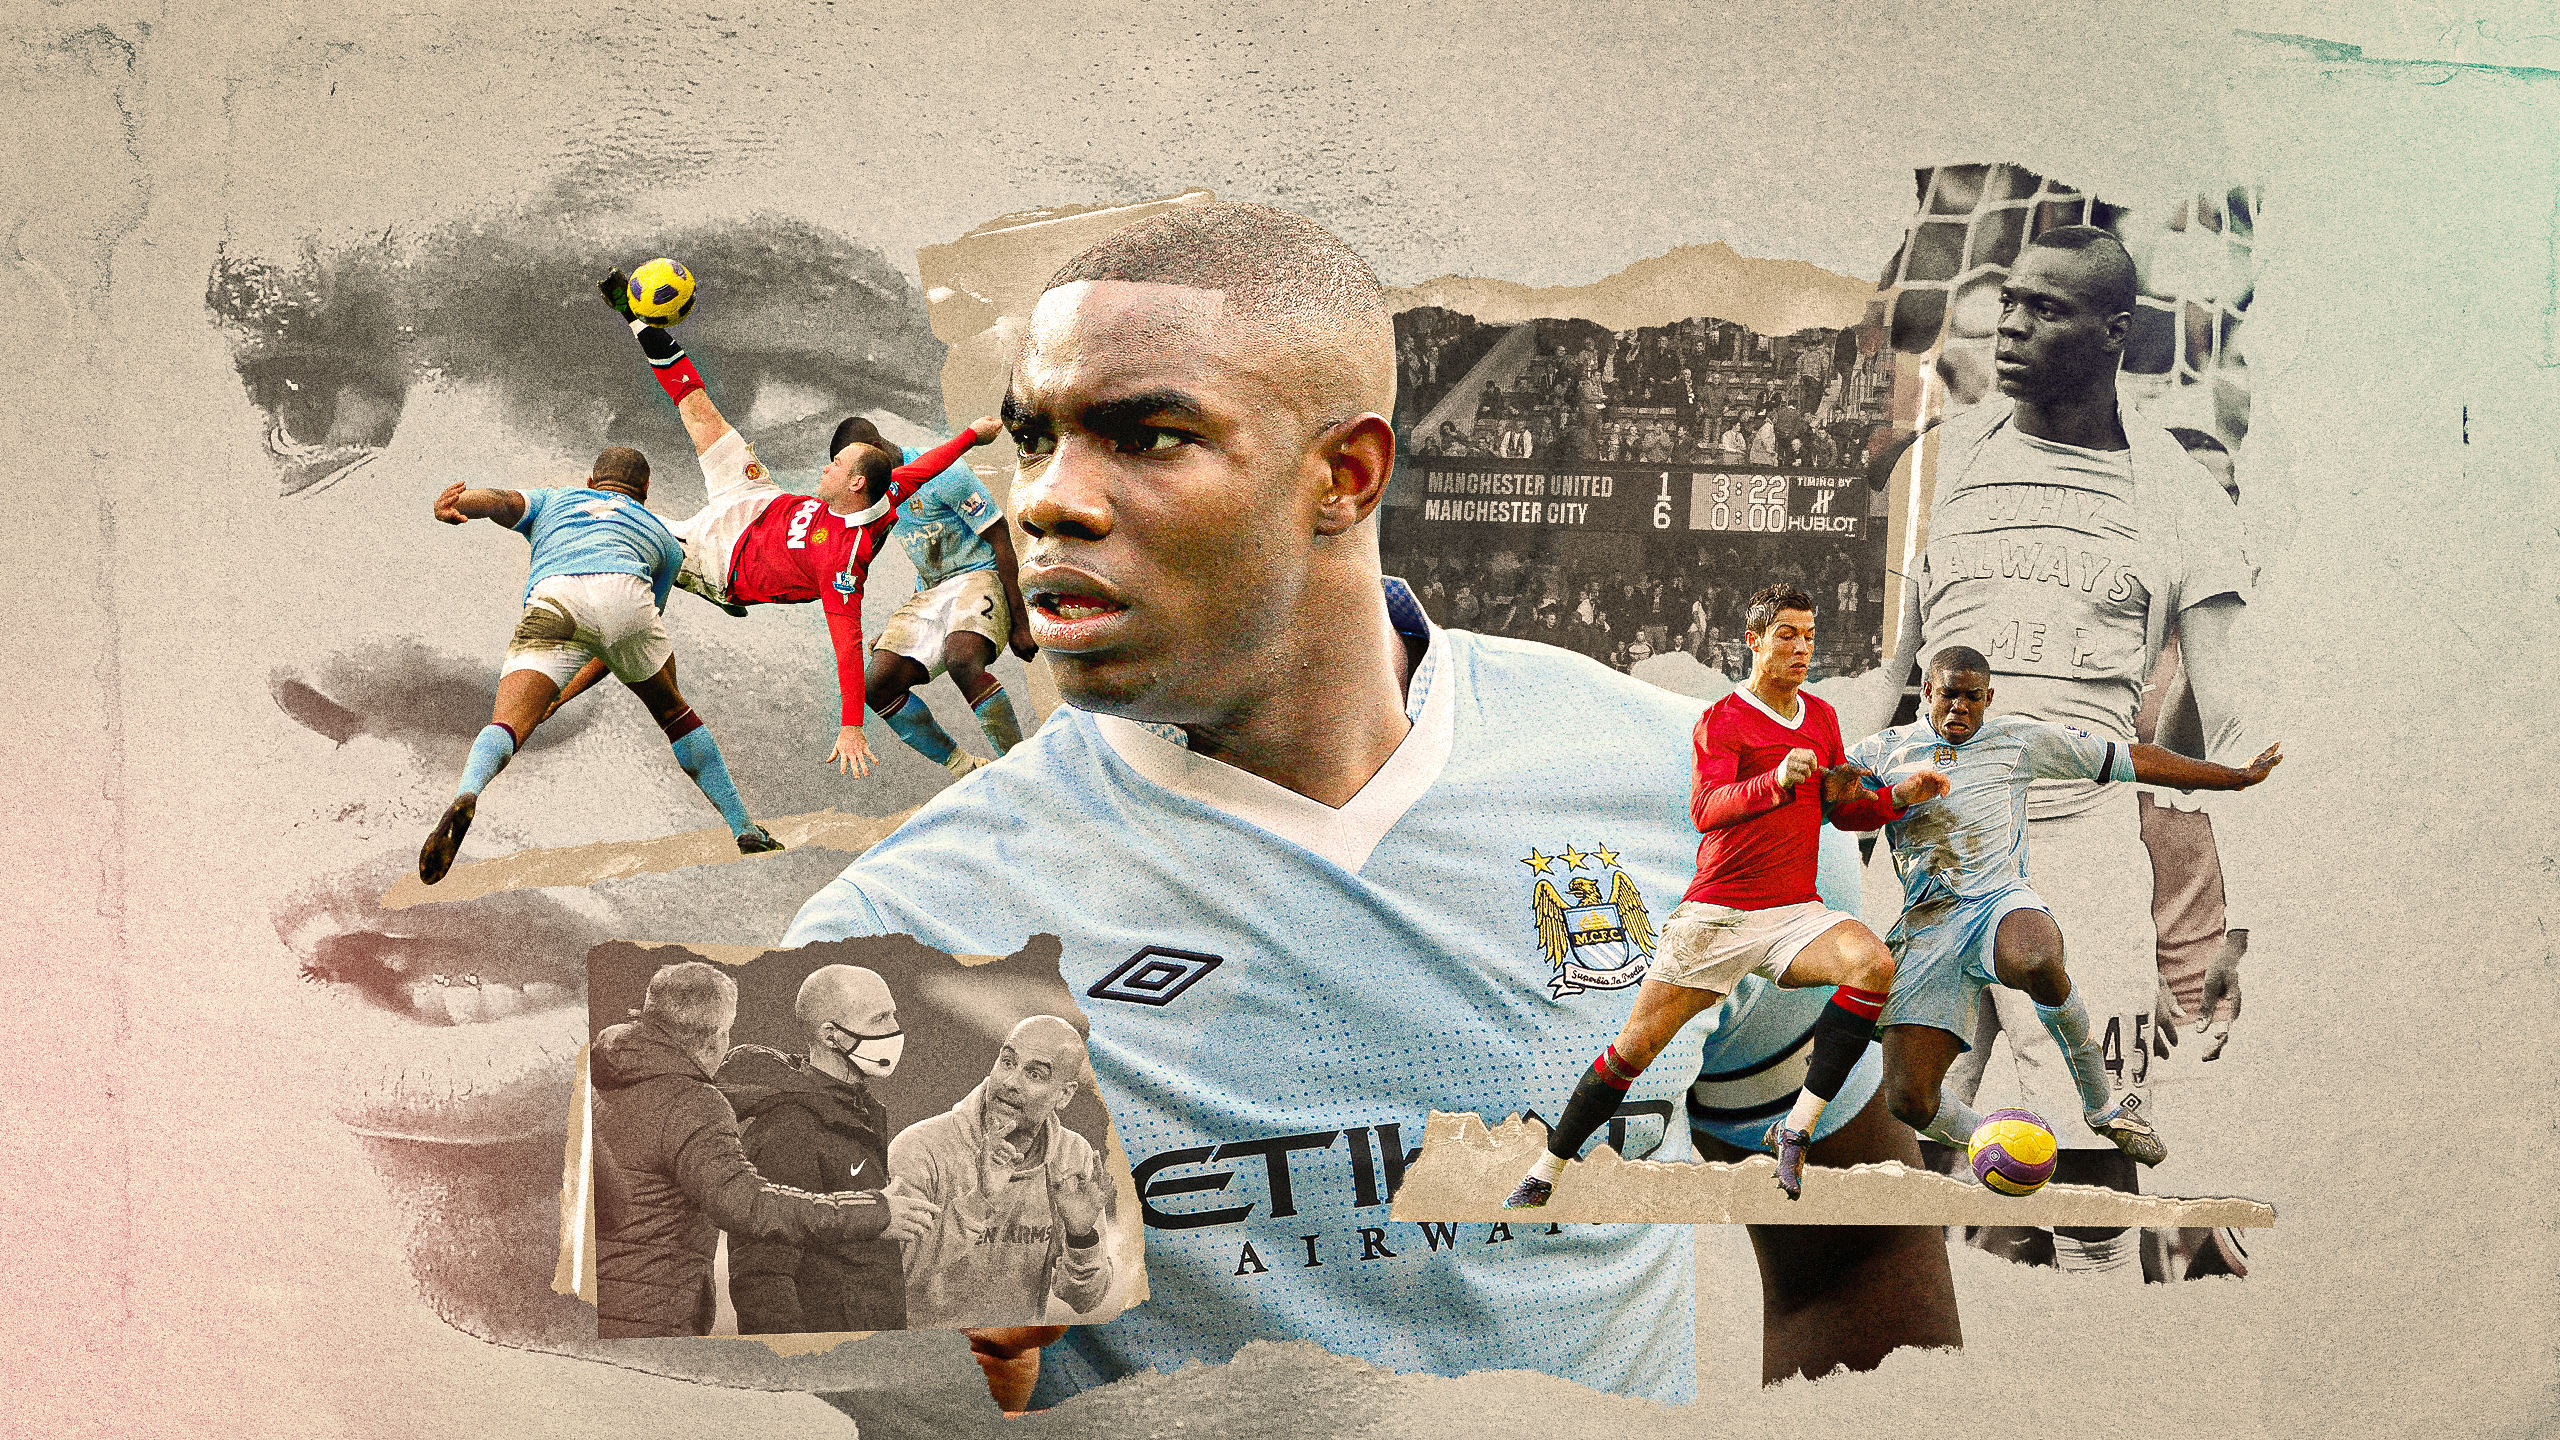 This Series-A superstar to don Manchester City colours